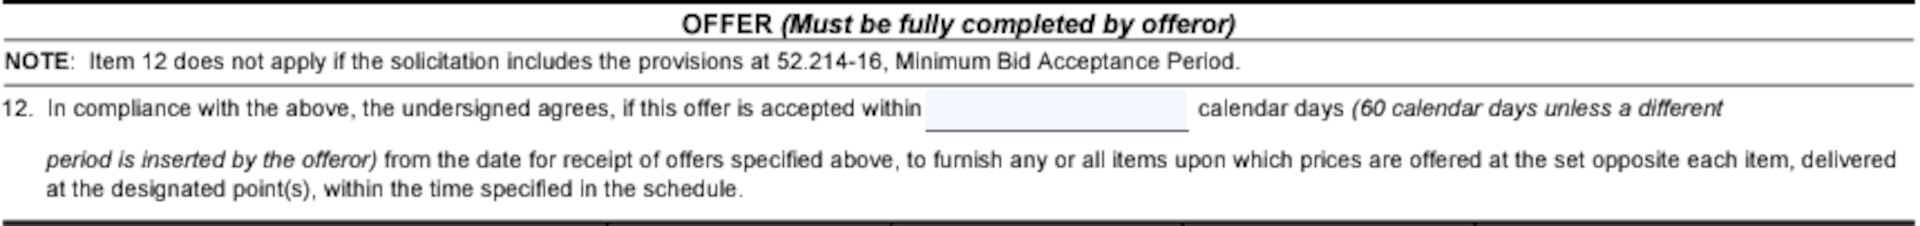 Box 12 of the Solicitation, Offer, and Award Form (SF33) for "In Compliance with Above, the Undersigned Agrees, if this Offer is Accepted Within __ Calendar Days" field. See adjacent text or context for equivalent information of image.